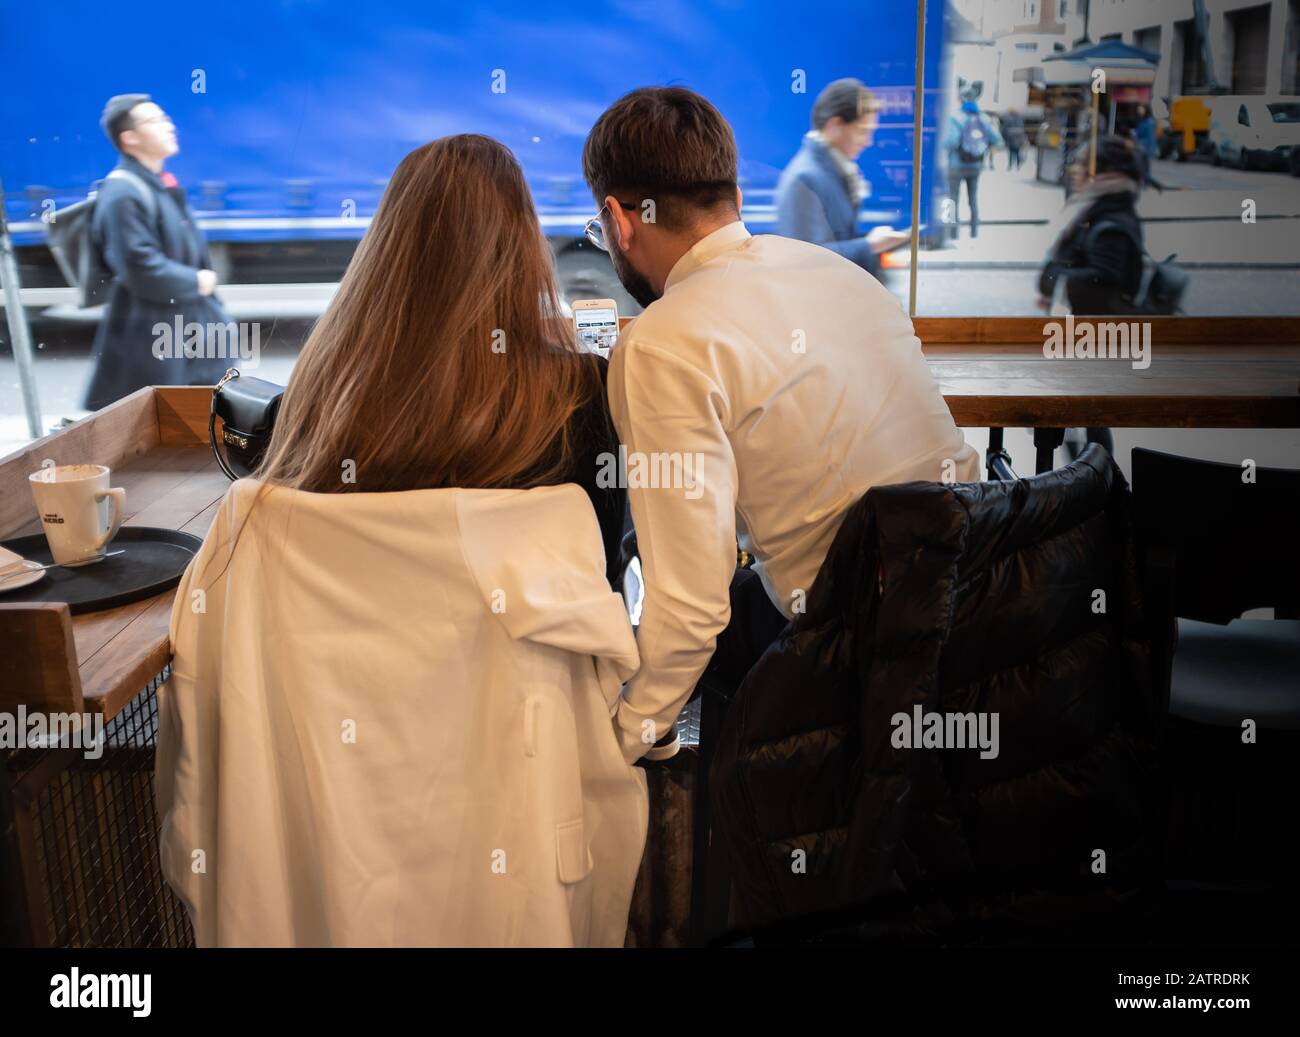 young couple being affectionate in coffee shop Stock Photo